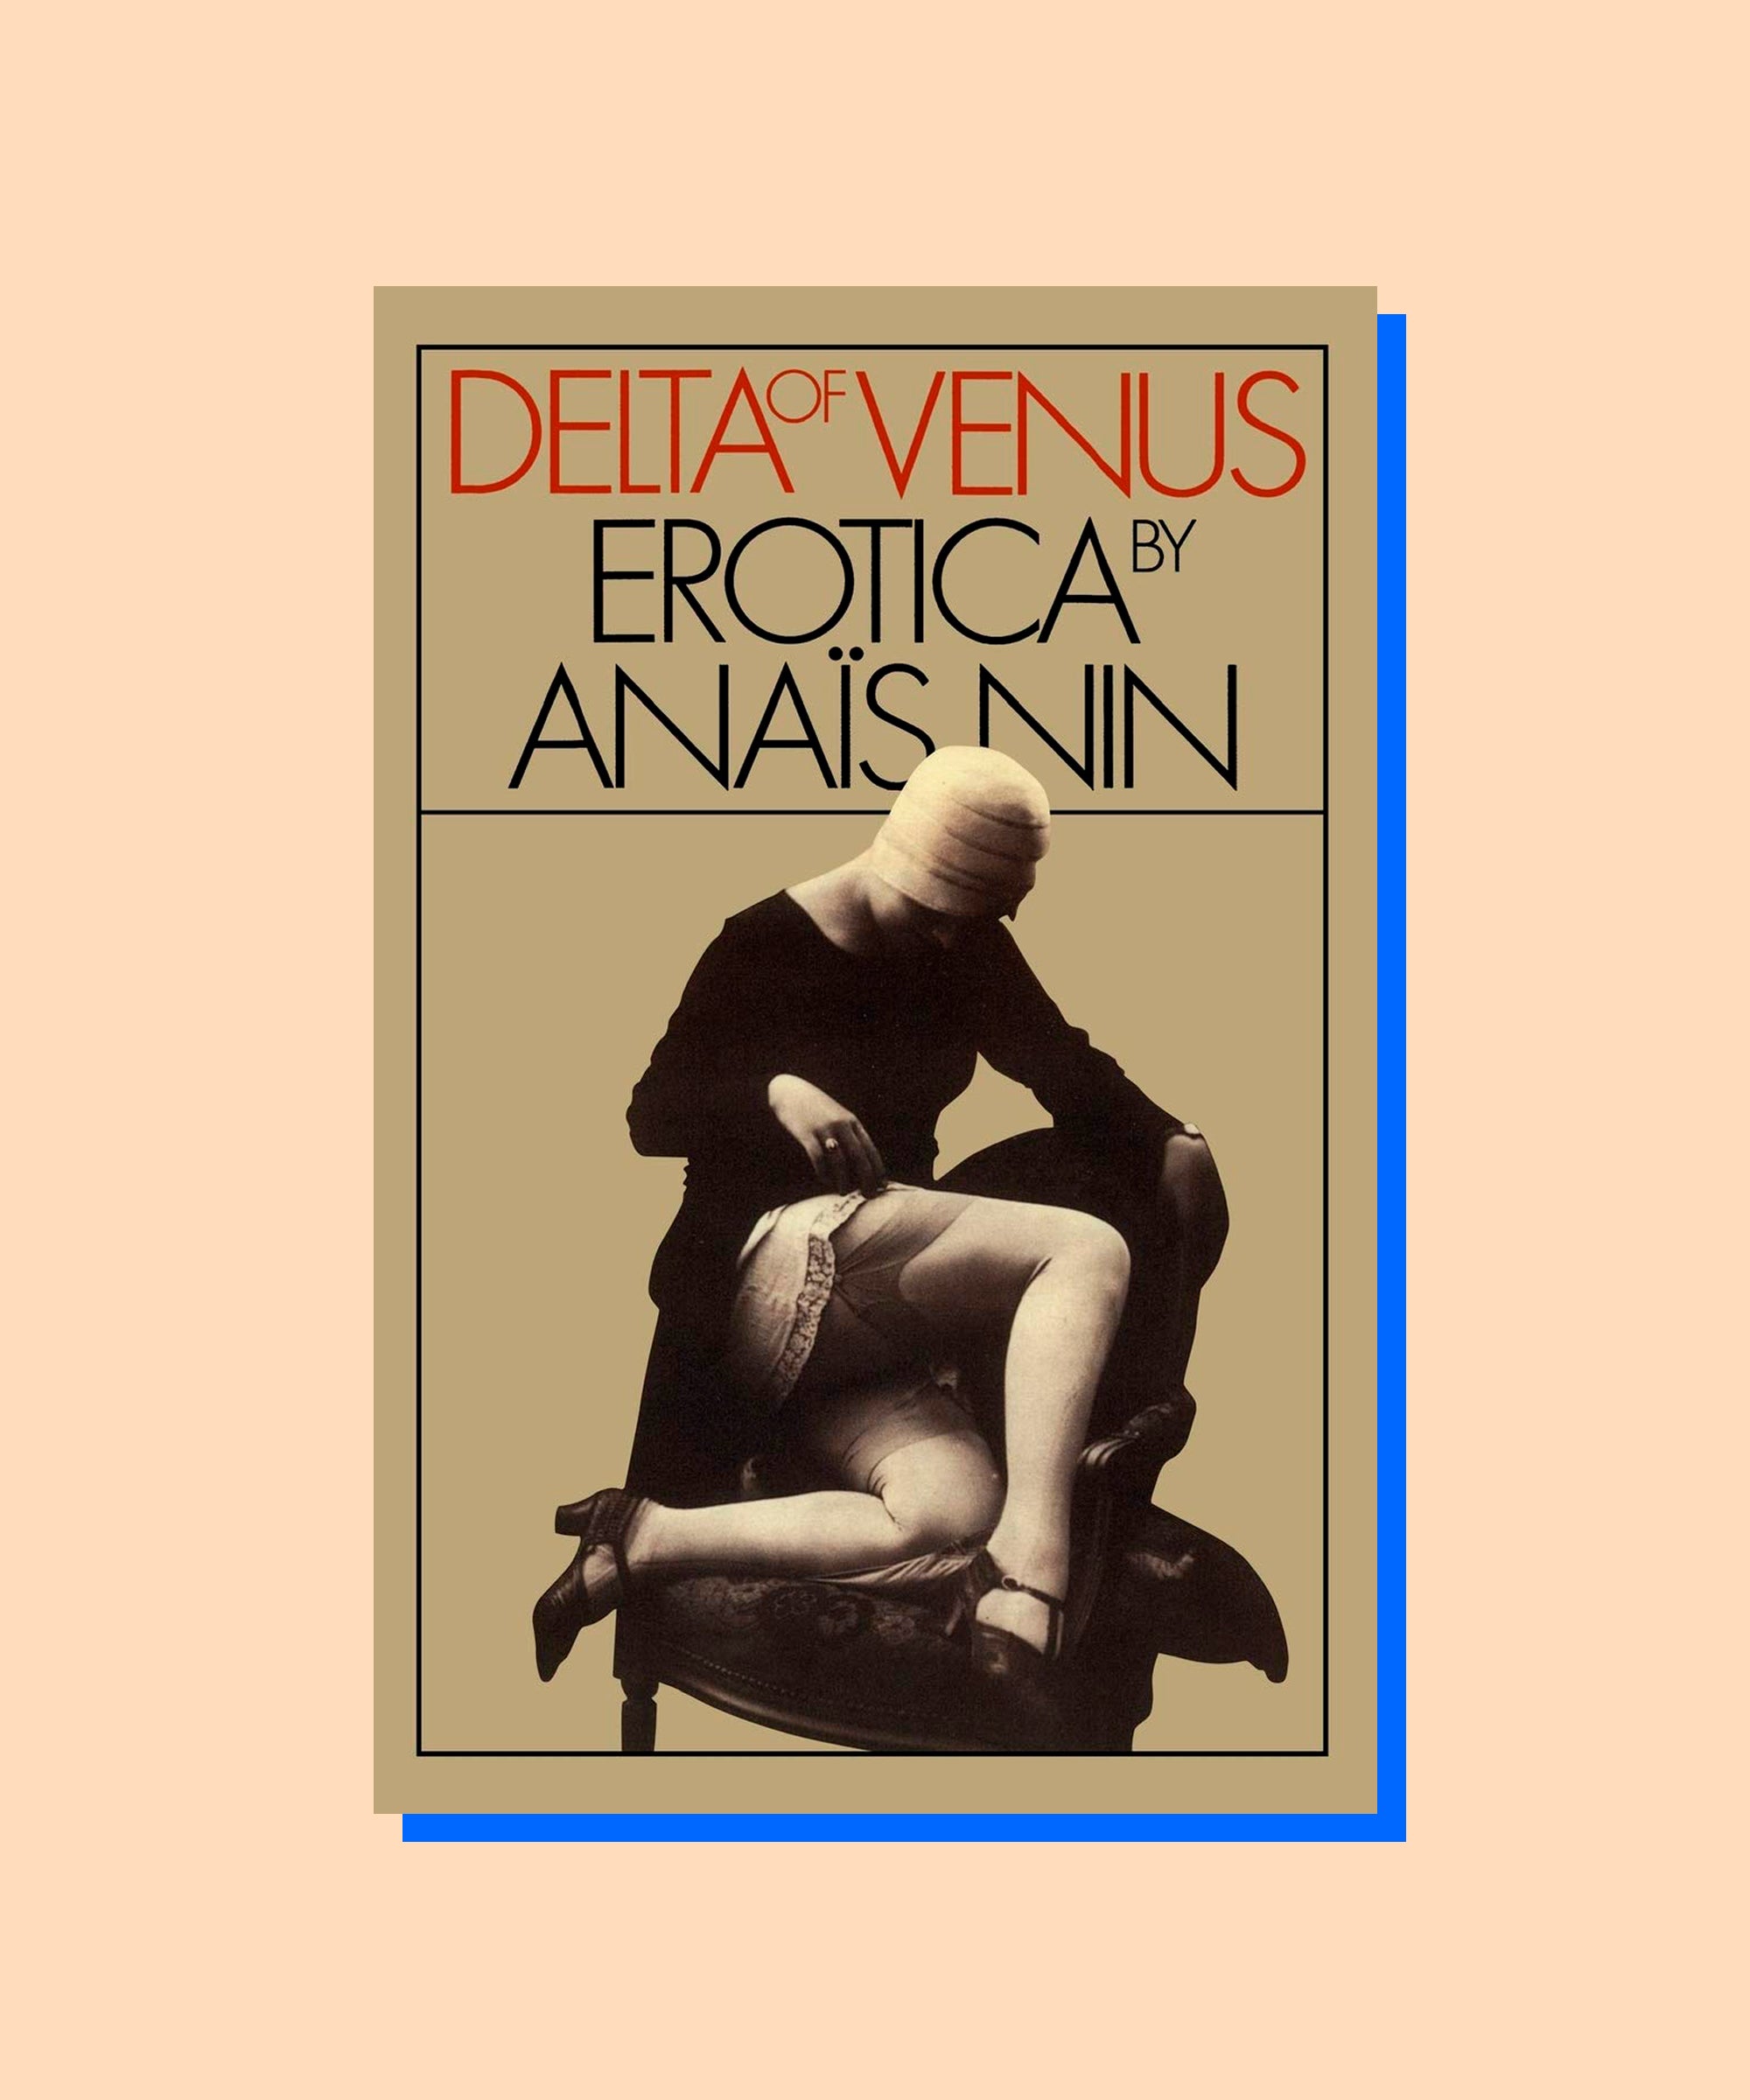 Erotic Novels Online - The 50 Most Erotic Books Full Of Sex Scenes To Read